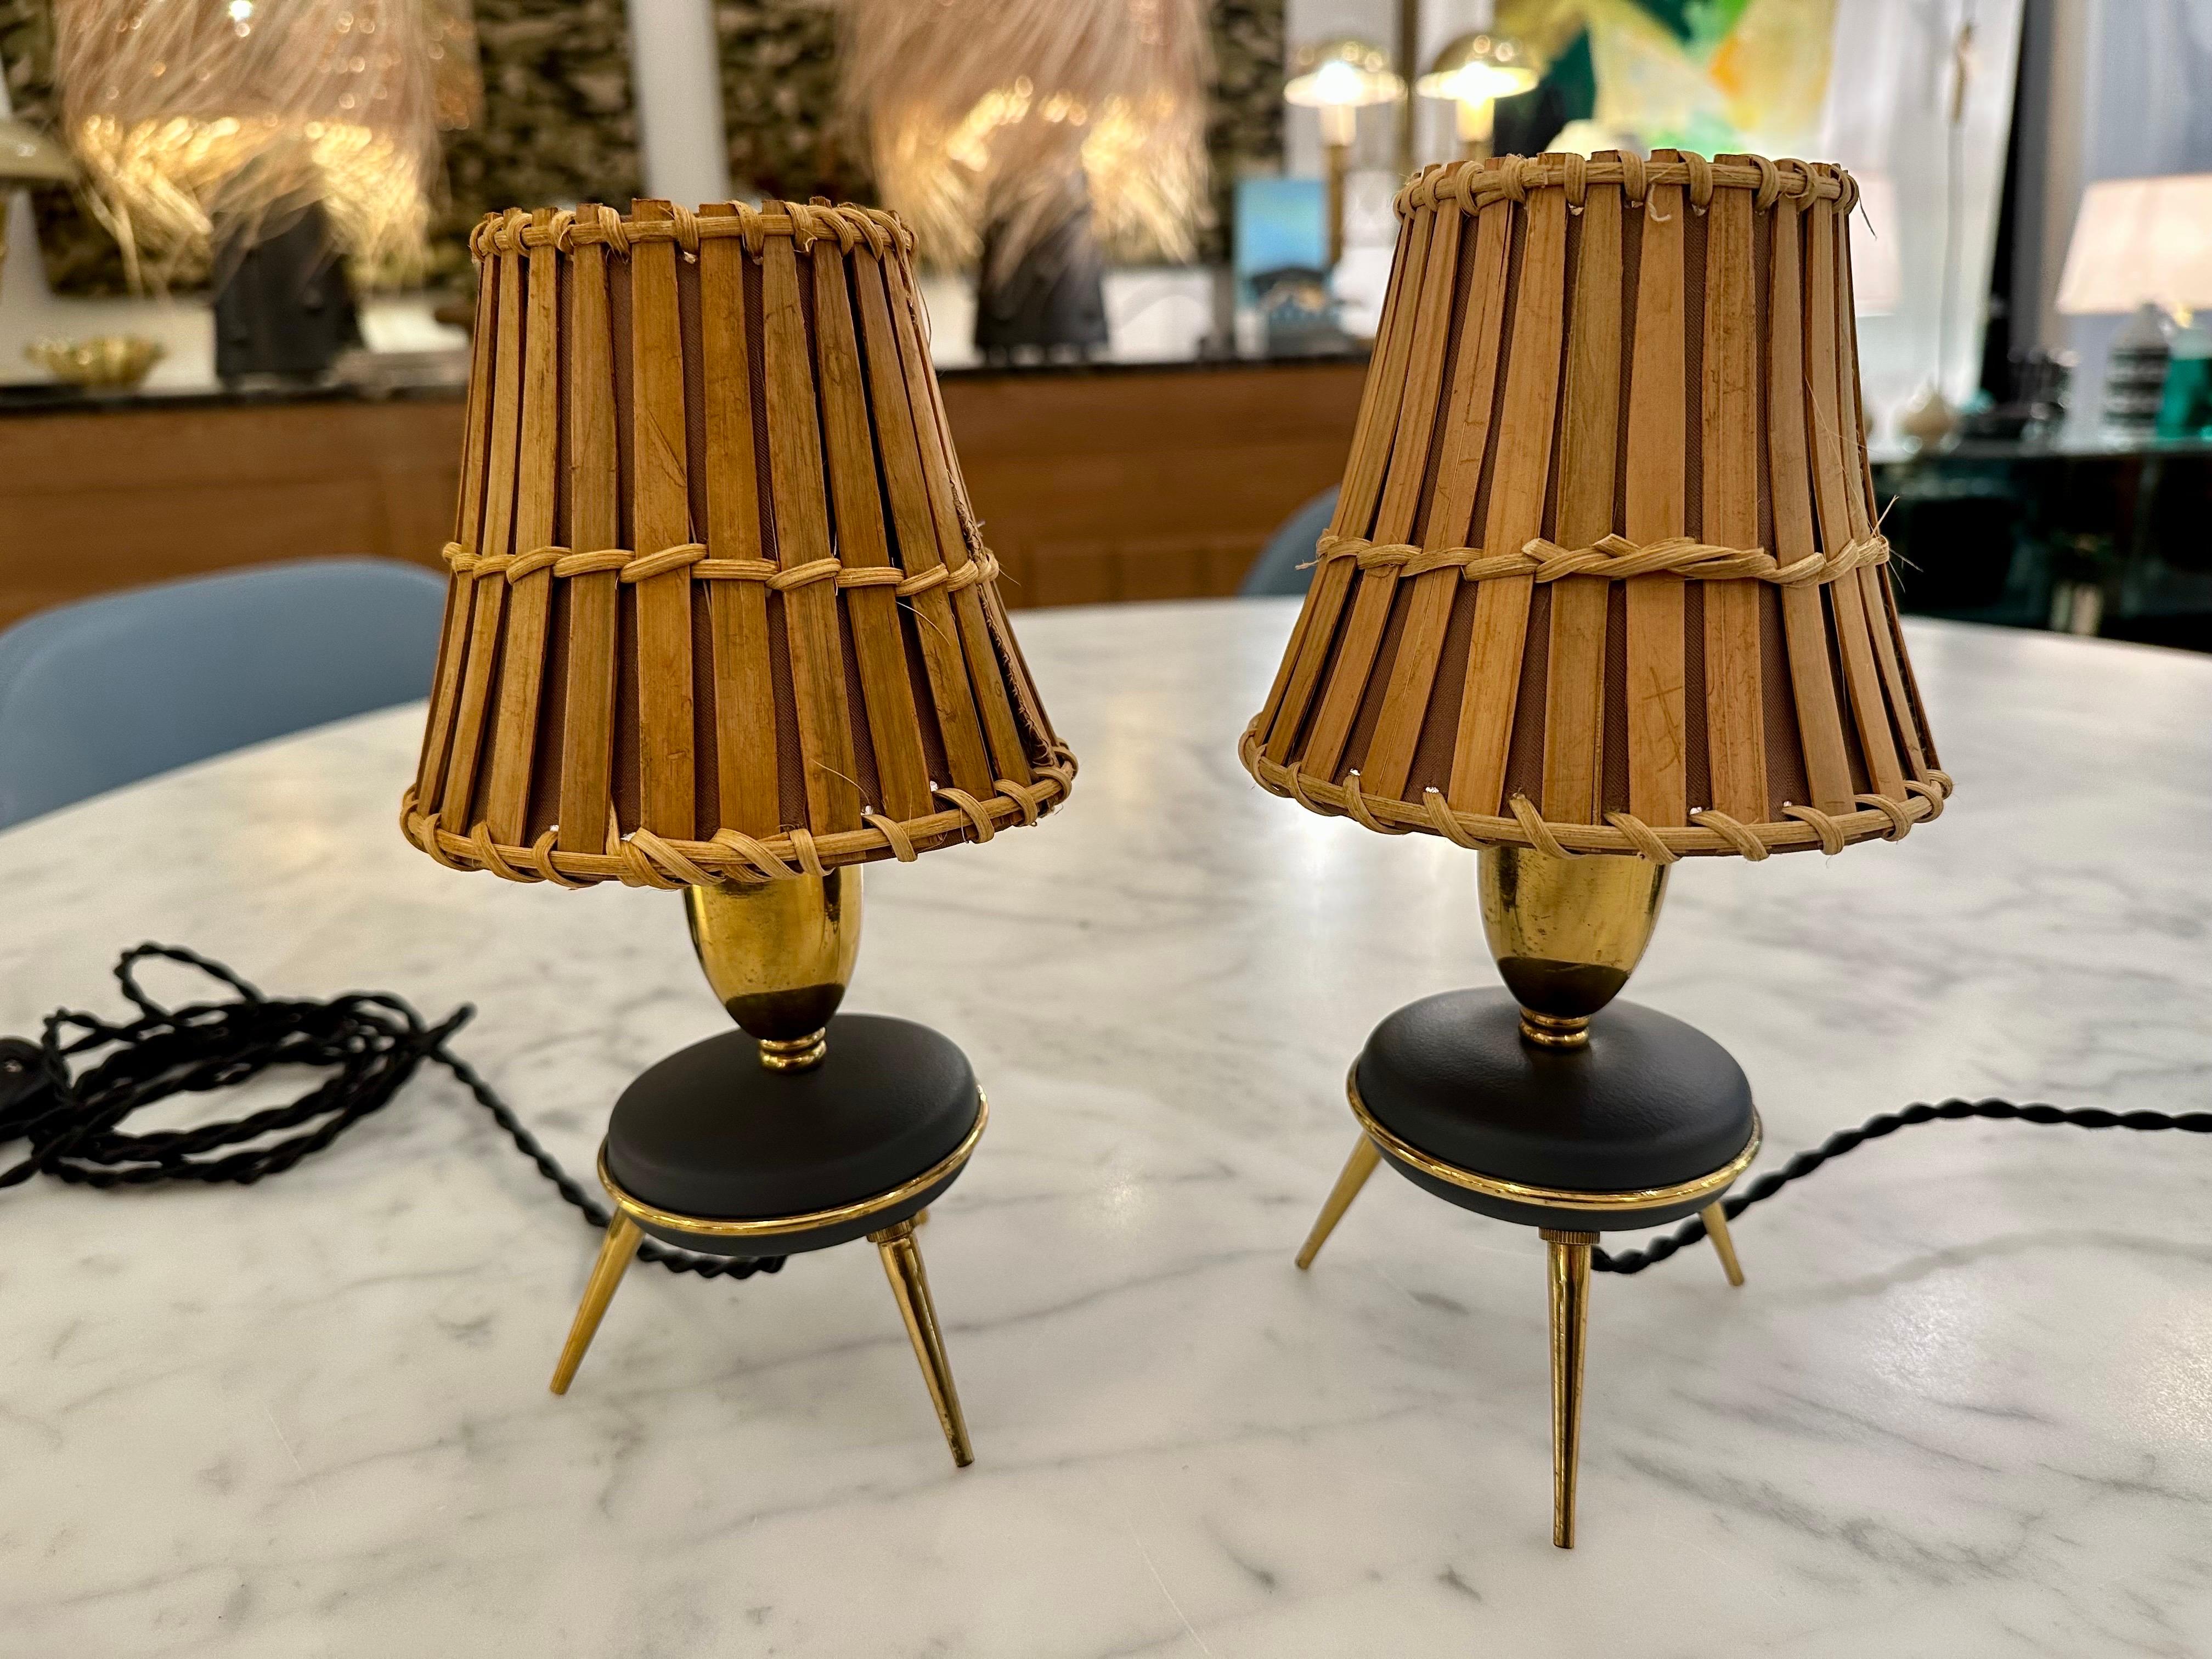 These are simply stunning little table lamps with brass trio legs and brass trim to metal saucer style body.  They have been professionally restored with new twisted black silk cable and switch, new rattan and bamboo shades to enhance these